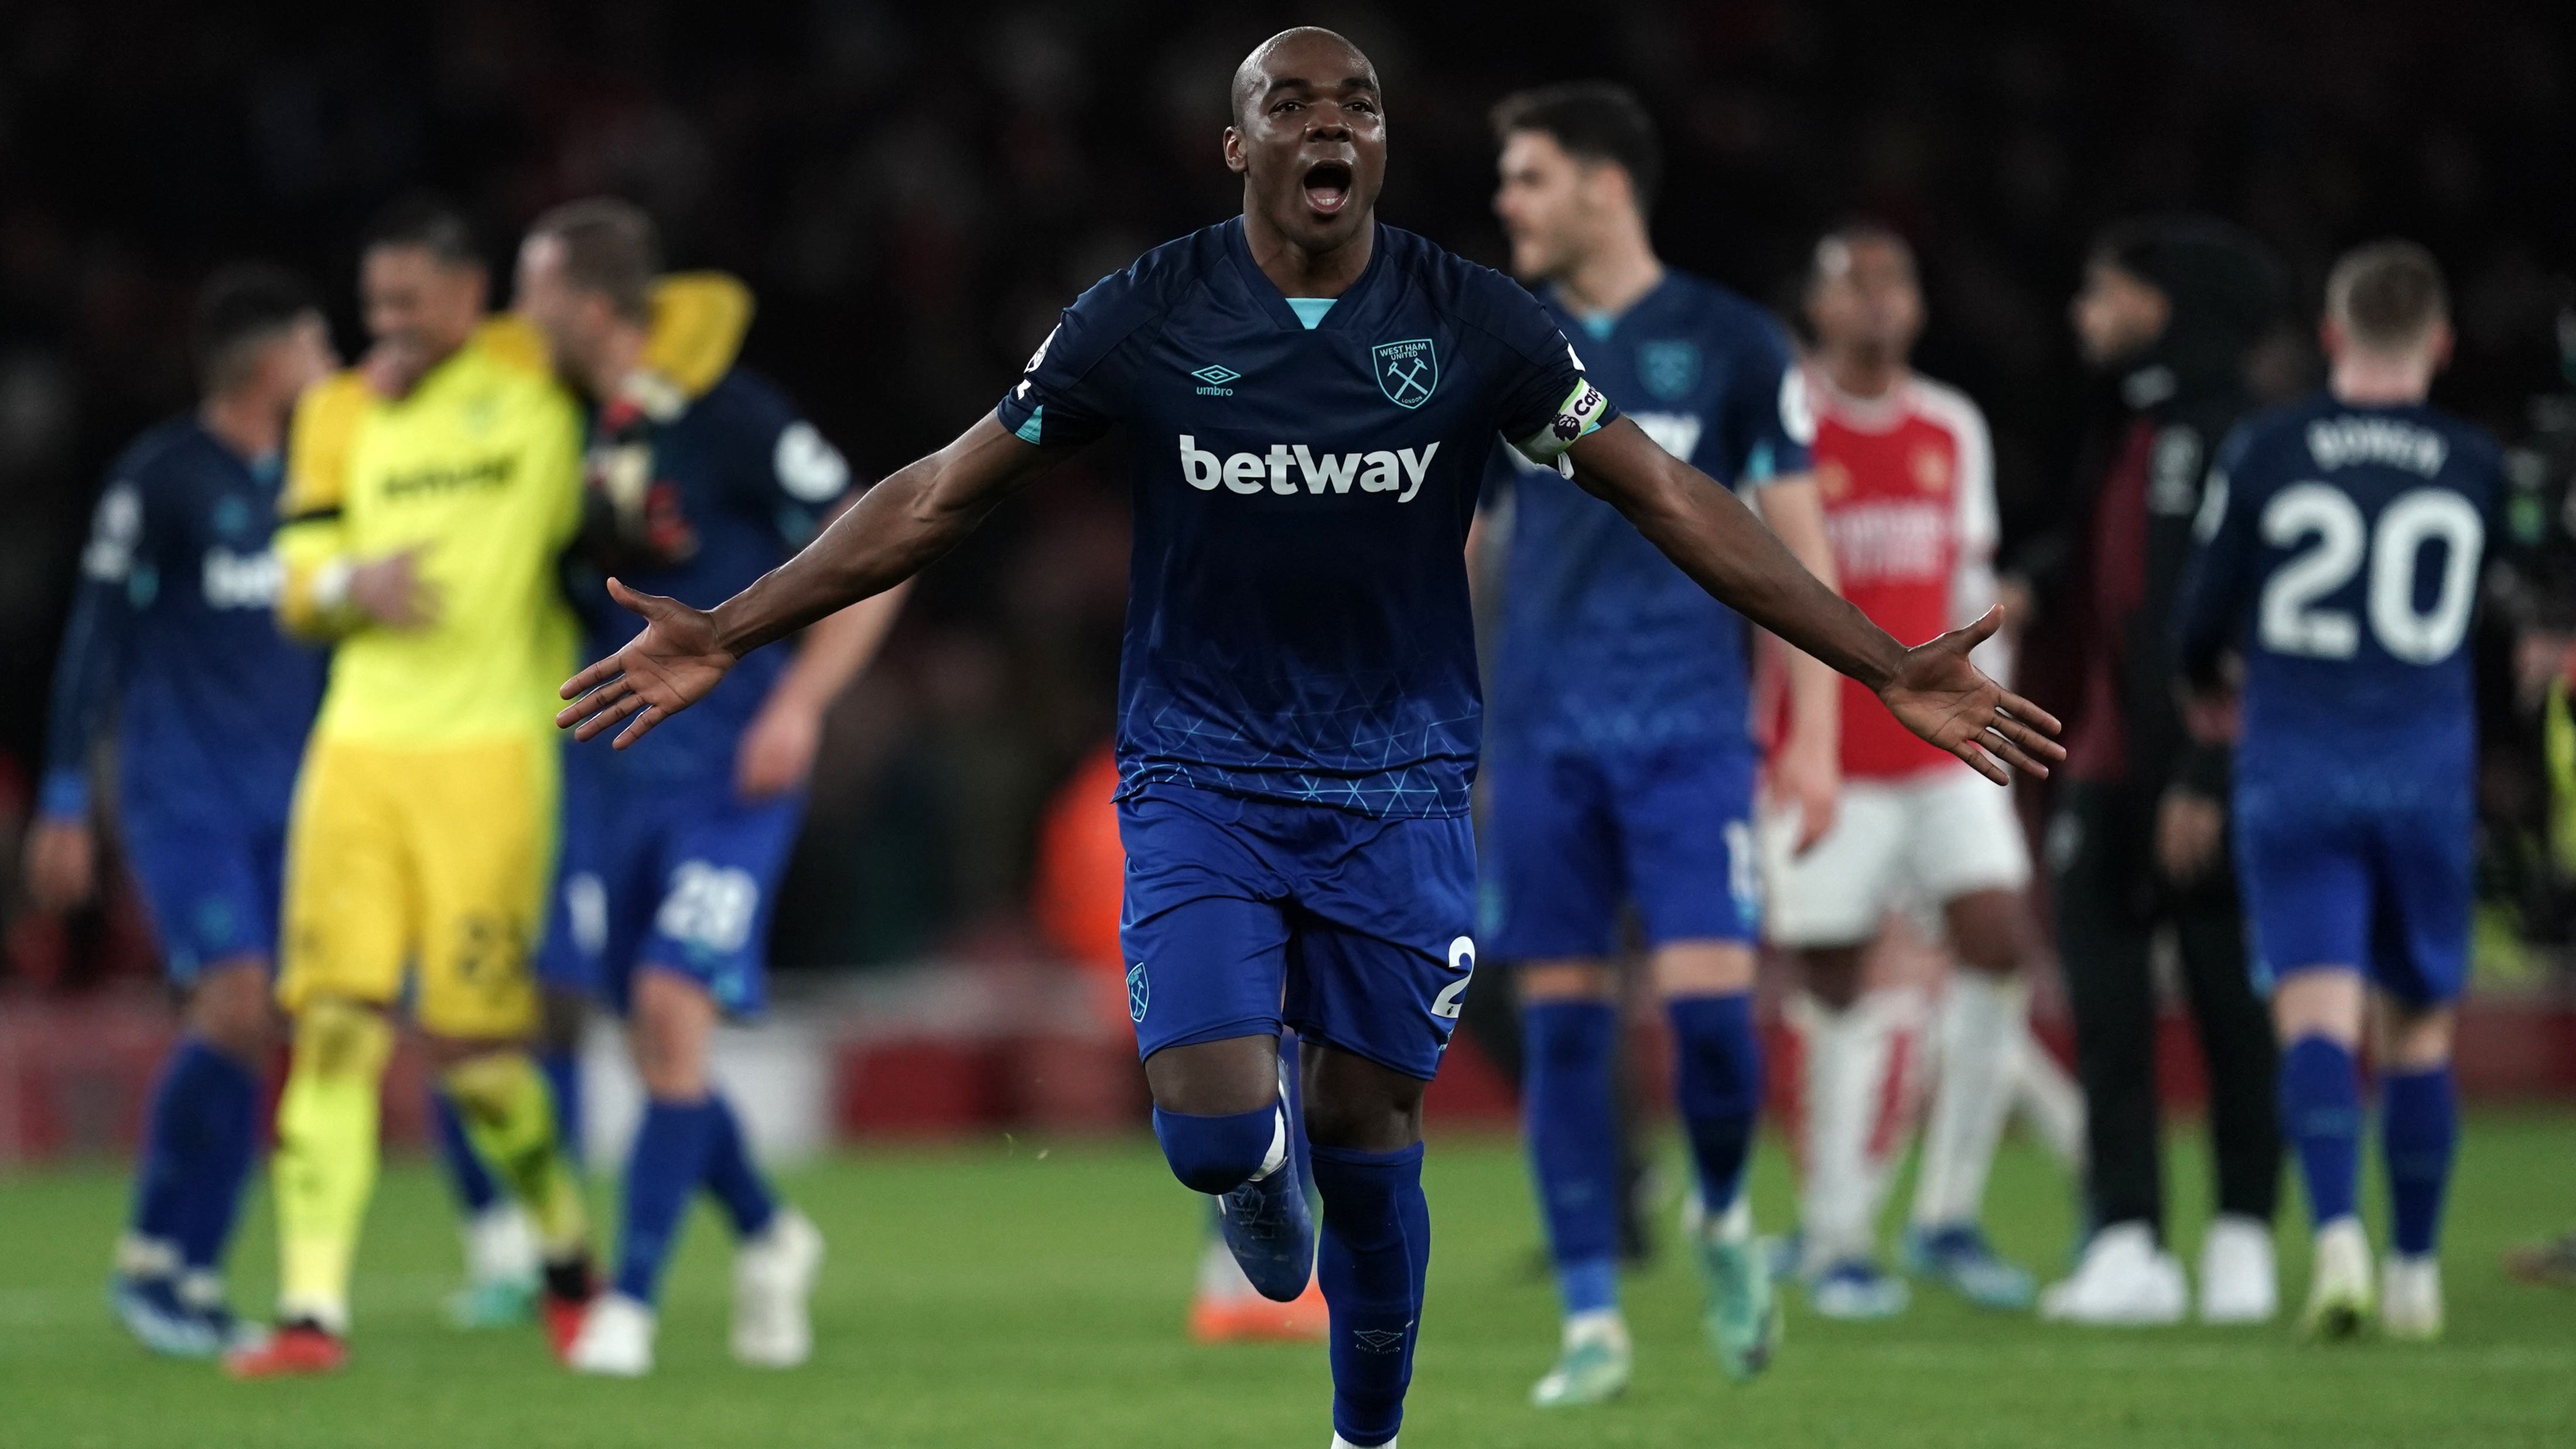 Arsenal lose to West Ham and miss chance to return to Premier League summit